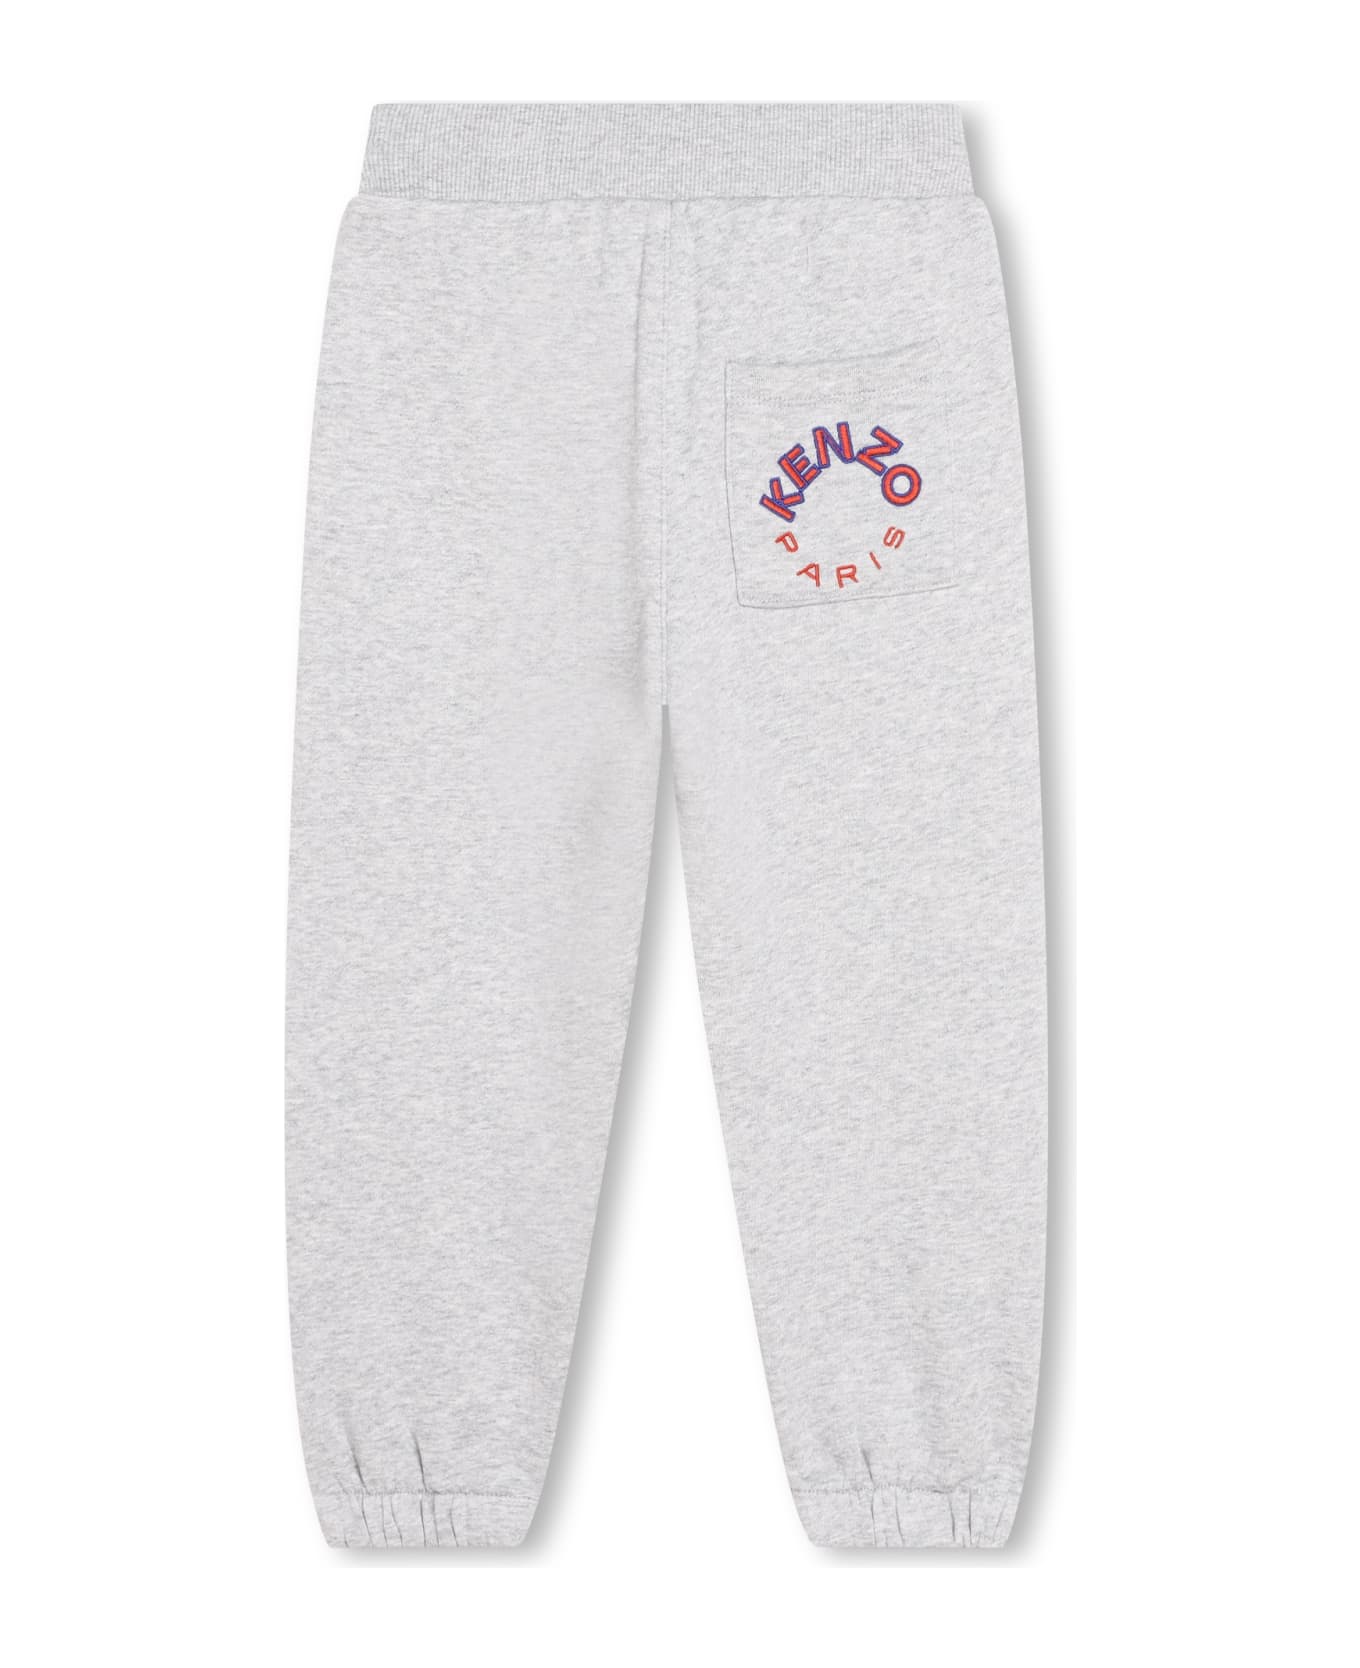 Kenzo Kids Sports Trousers With Application - Grigio Antico